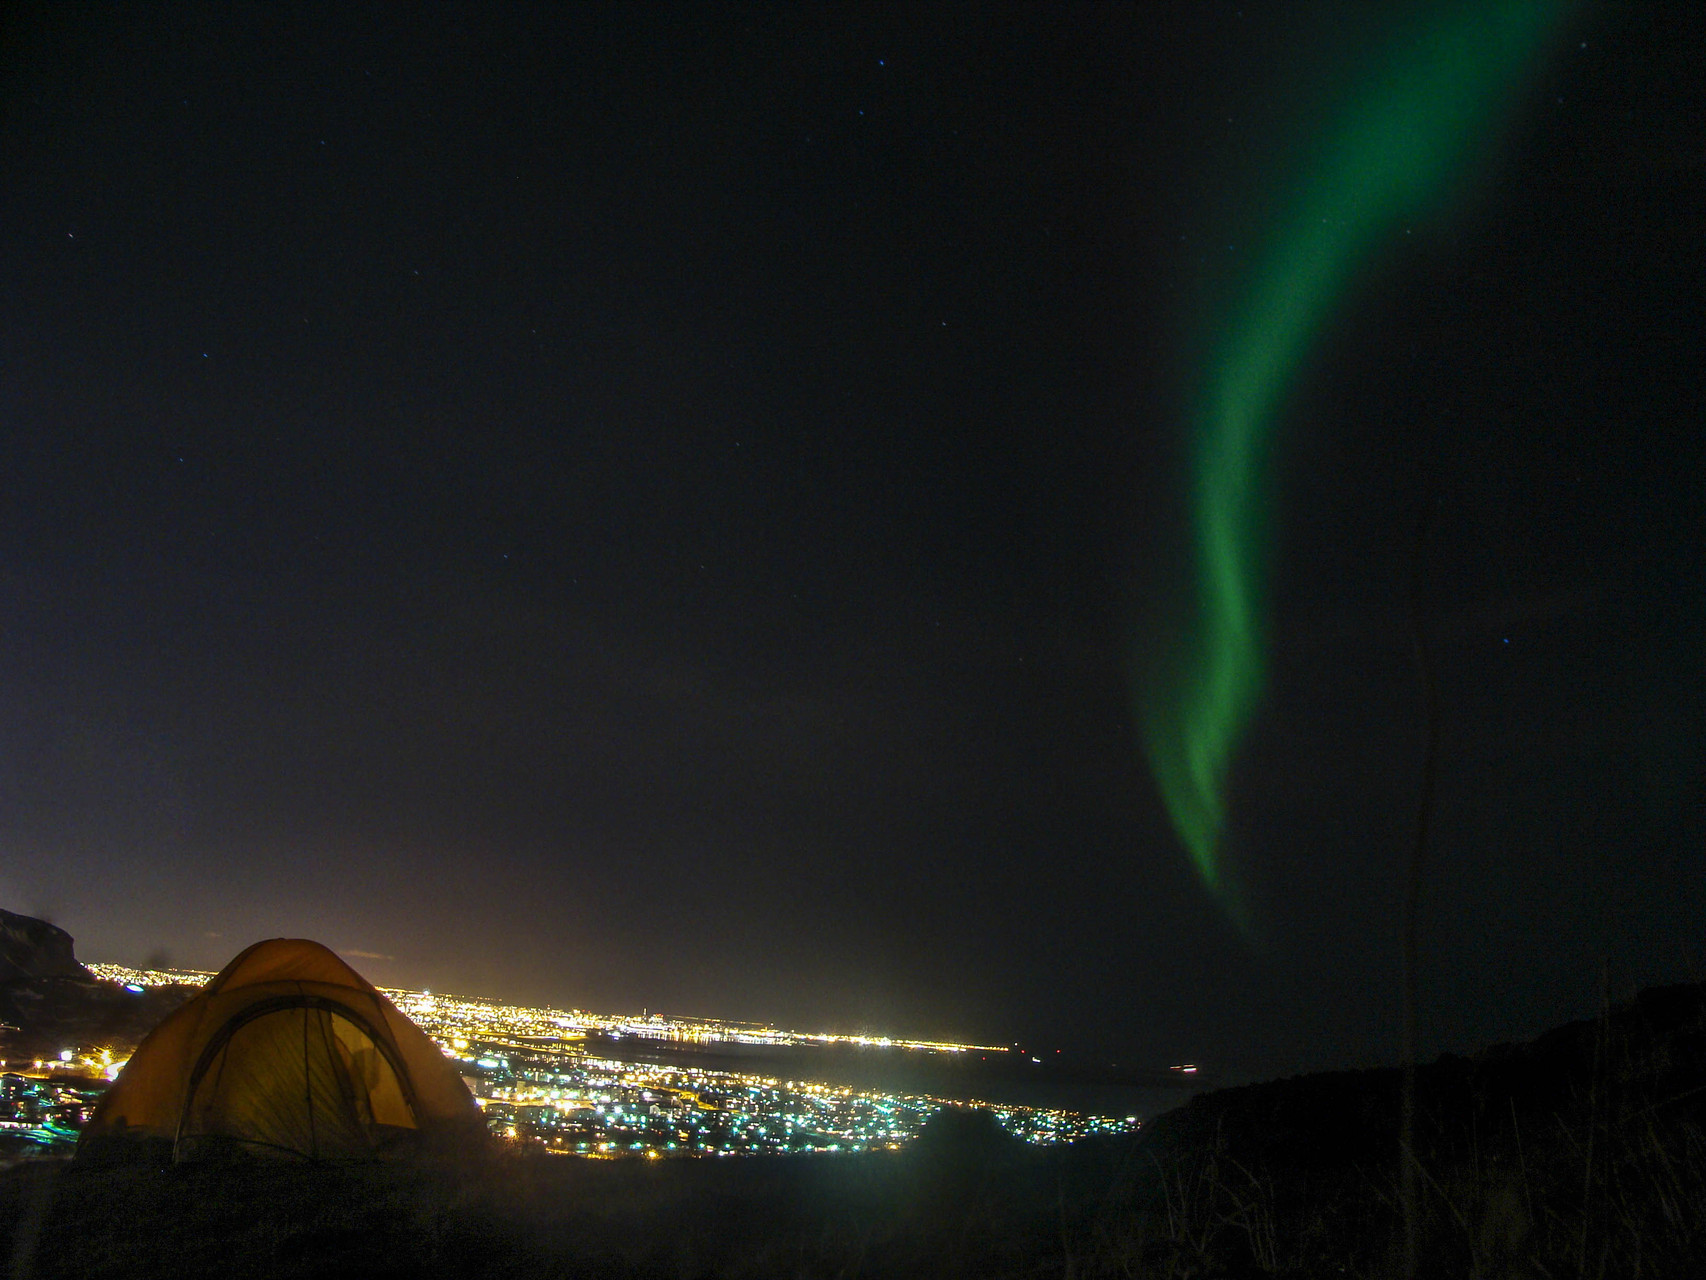 Unexpected northern lights at 10 p.m.